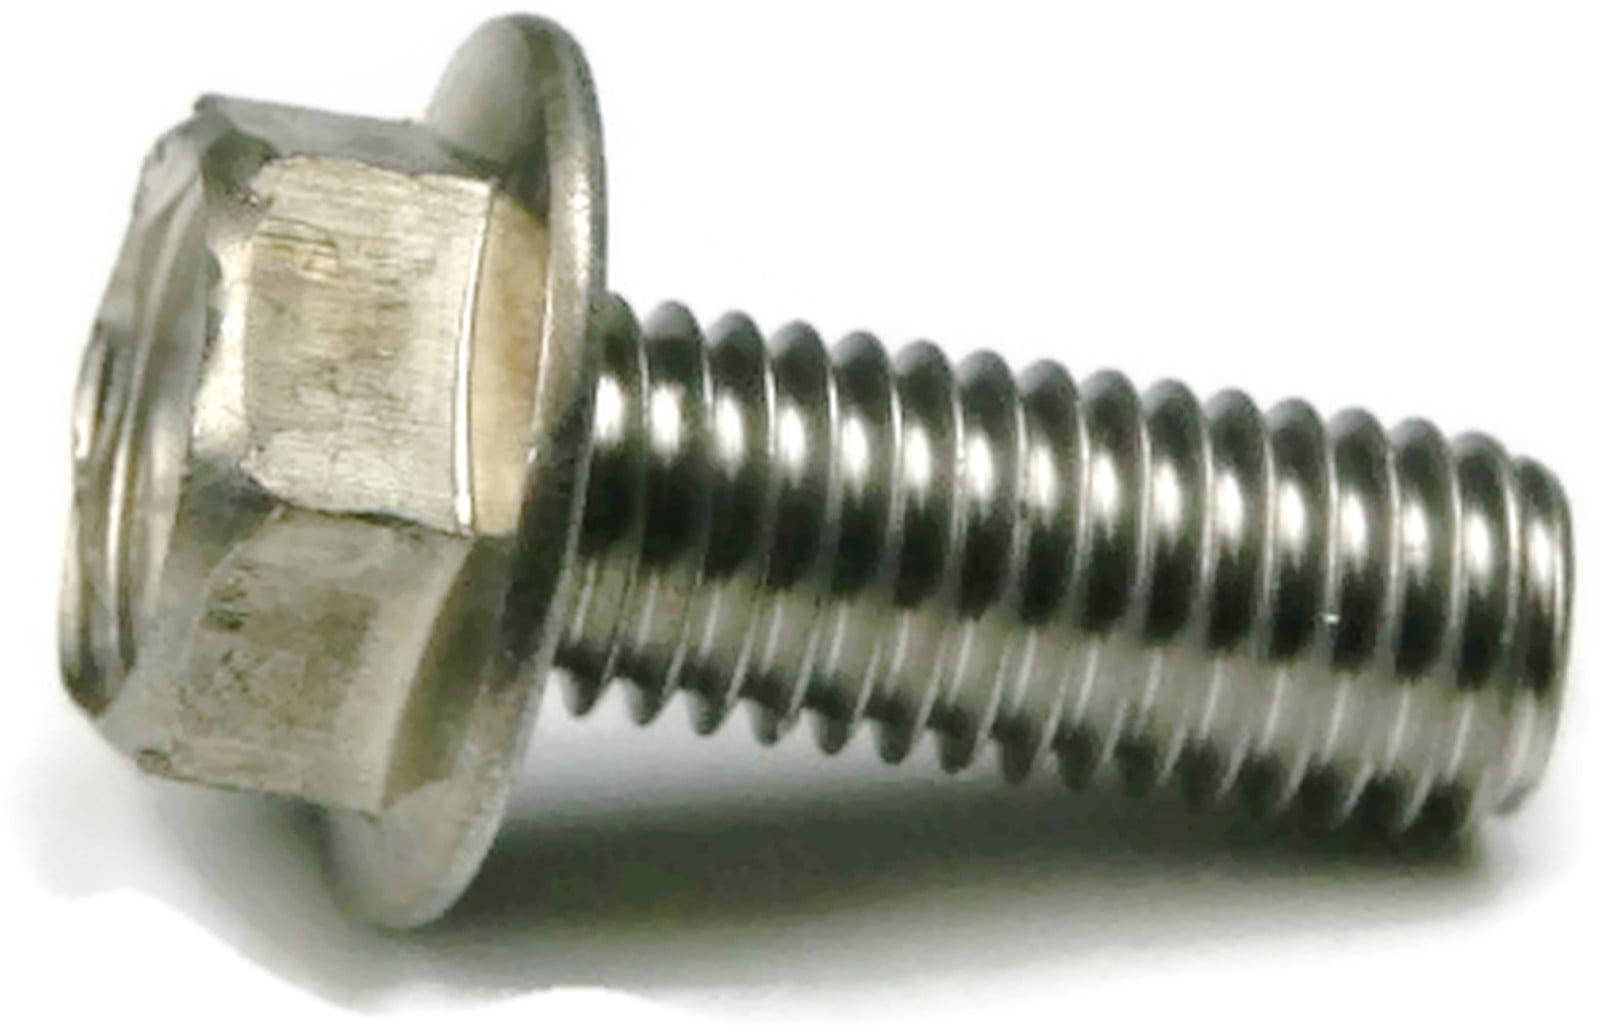 Qty 25 5//16/"-18 x 1//2/" Stainless Steel Hex Cap Serrated Flange Bolt WITH NUTS